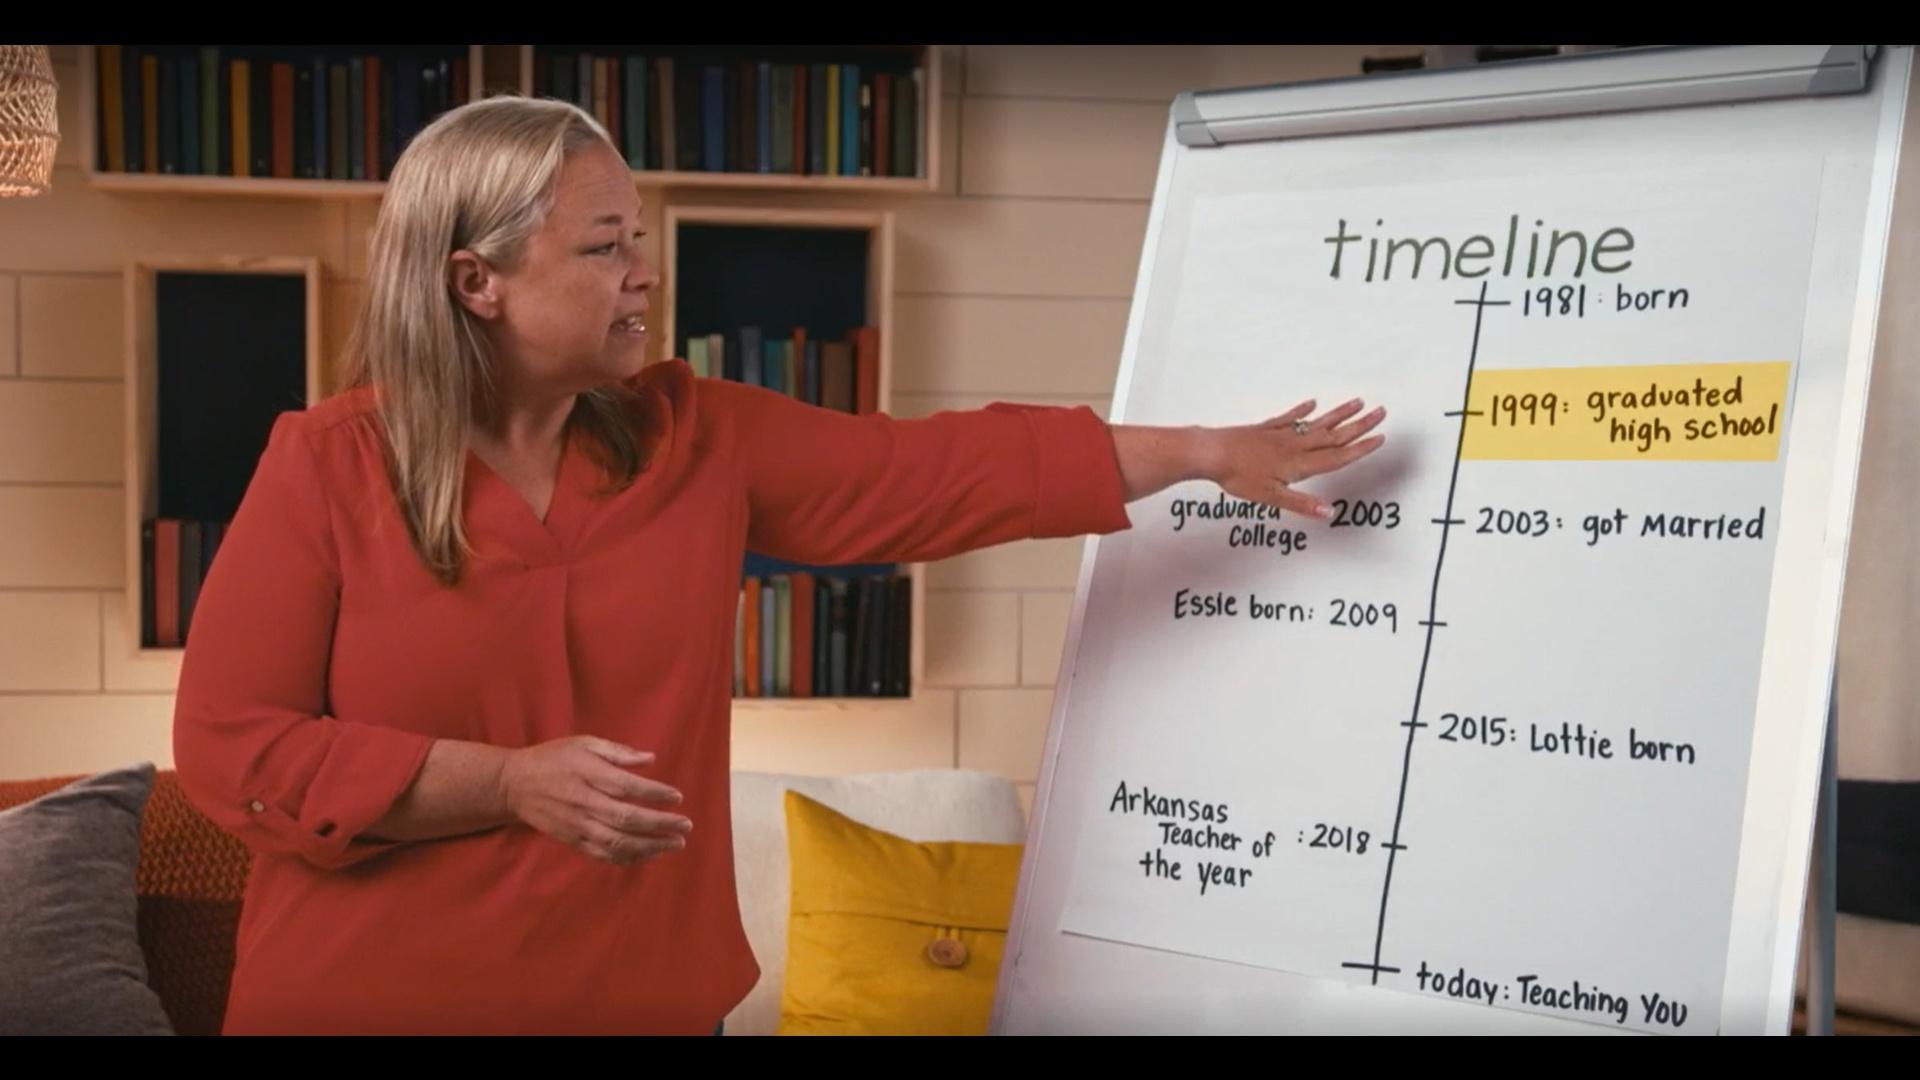 A woman pointing to a timeline on a whiteboard